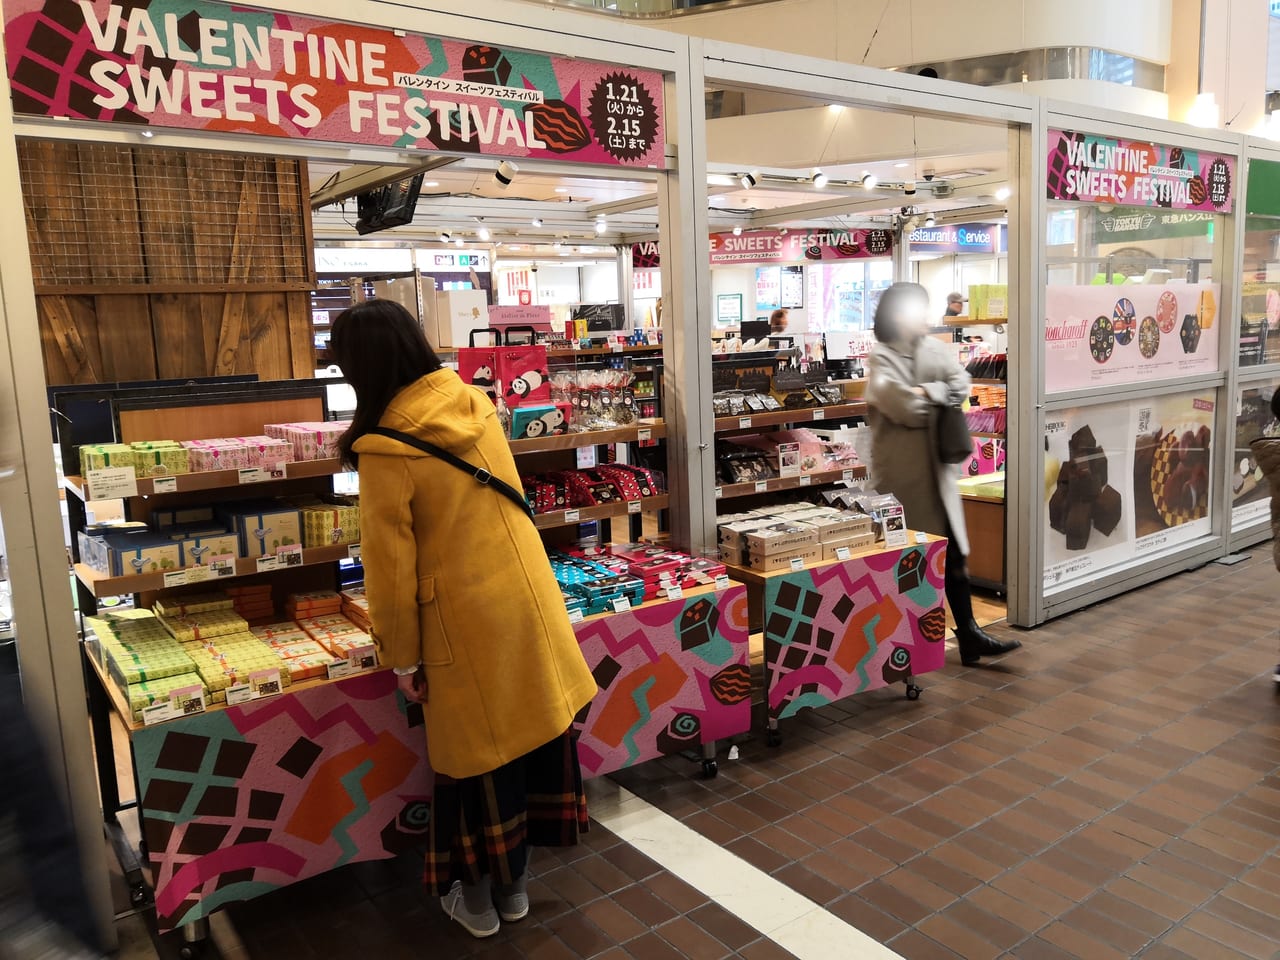 Valentine sweets festival